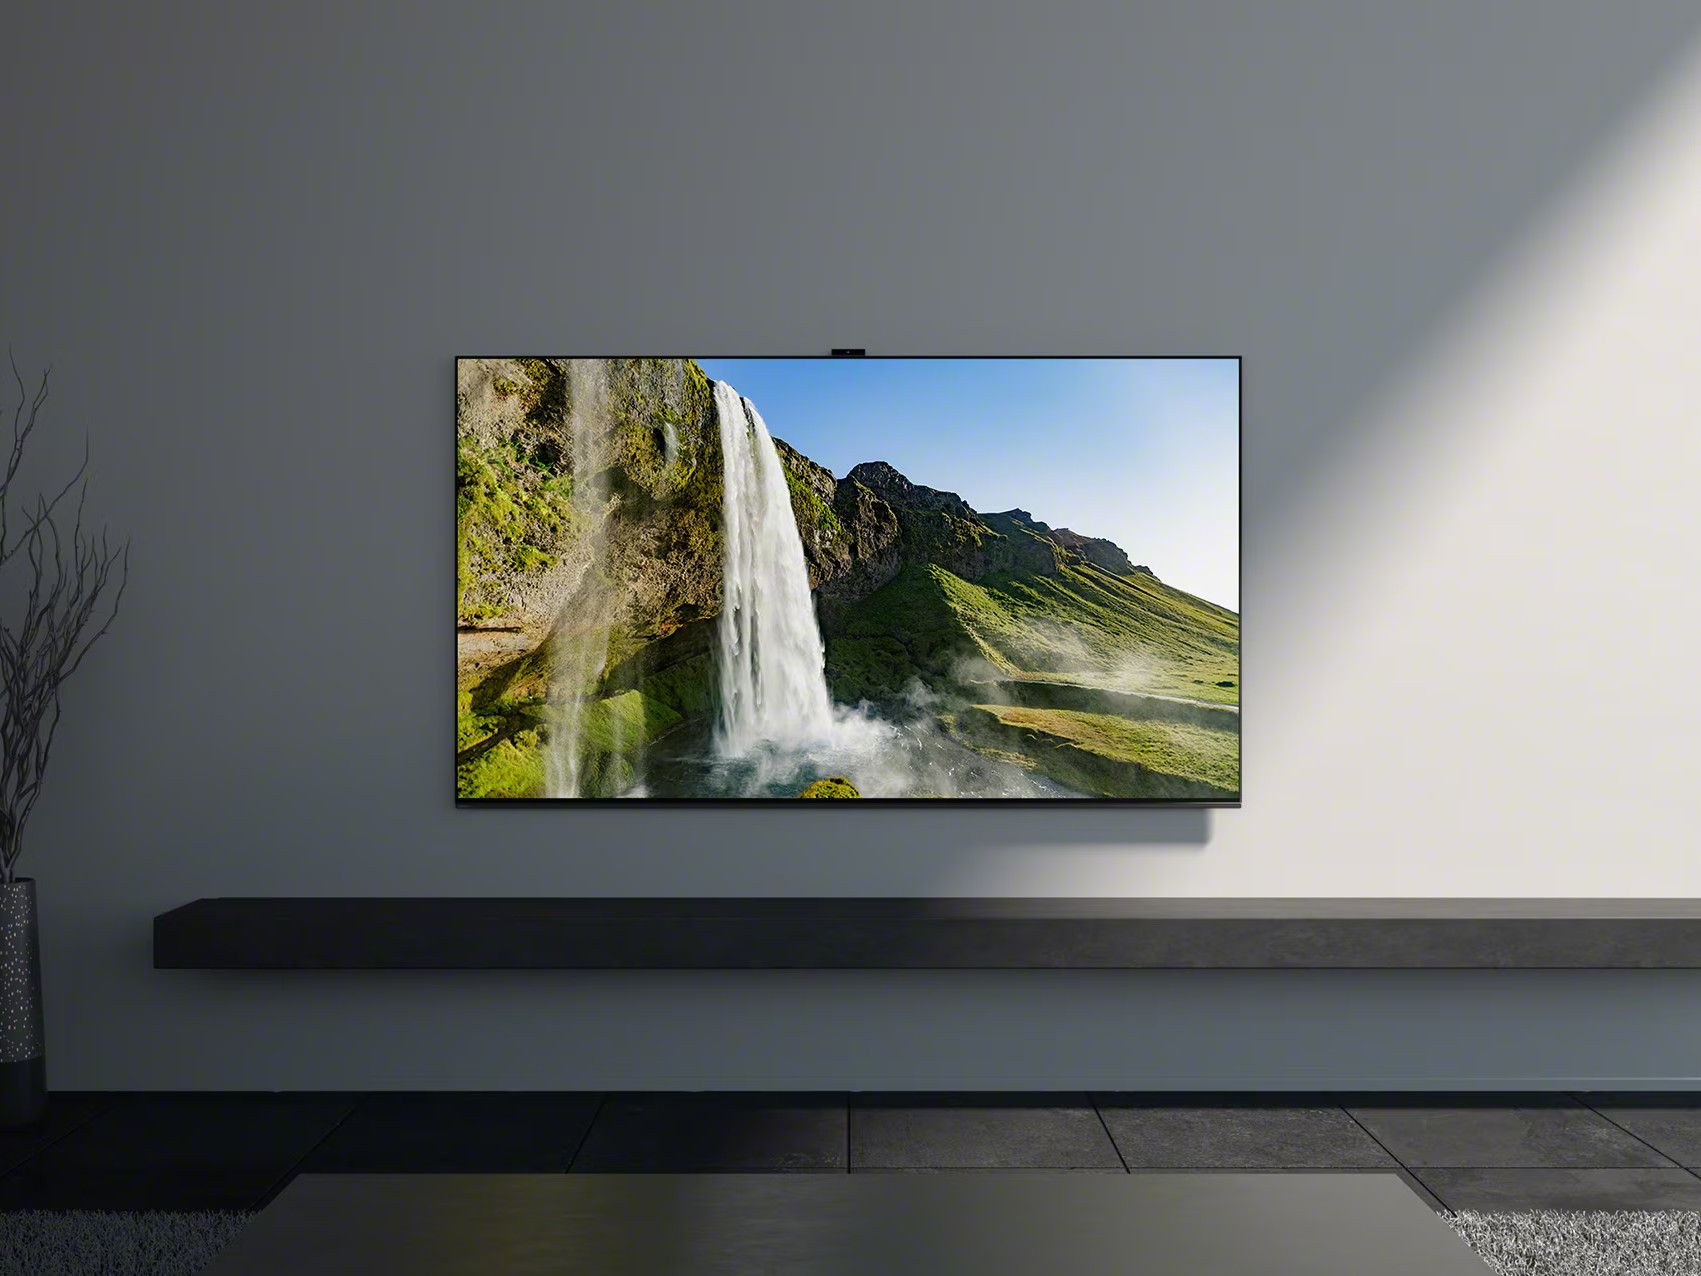 A Sony BRAVIA XR X90 mounted on a wall.